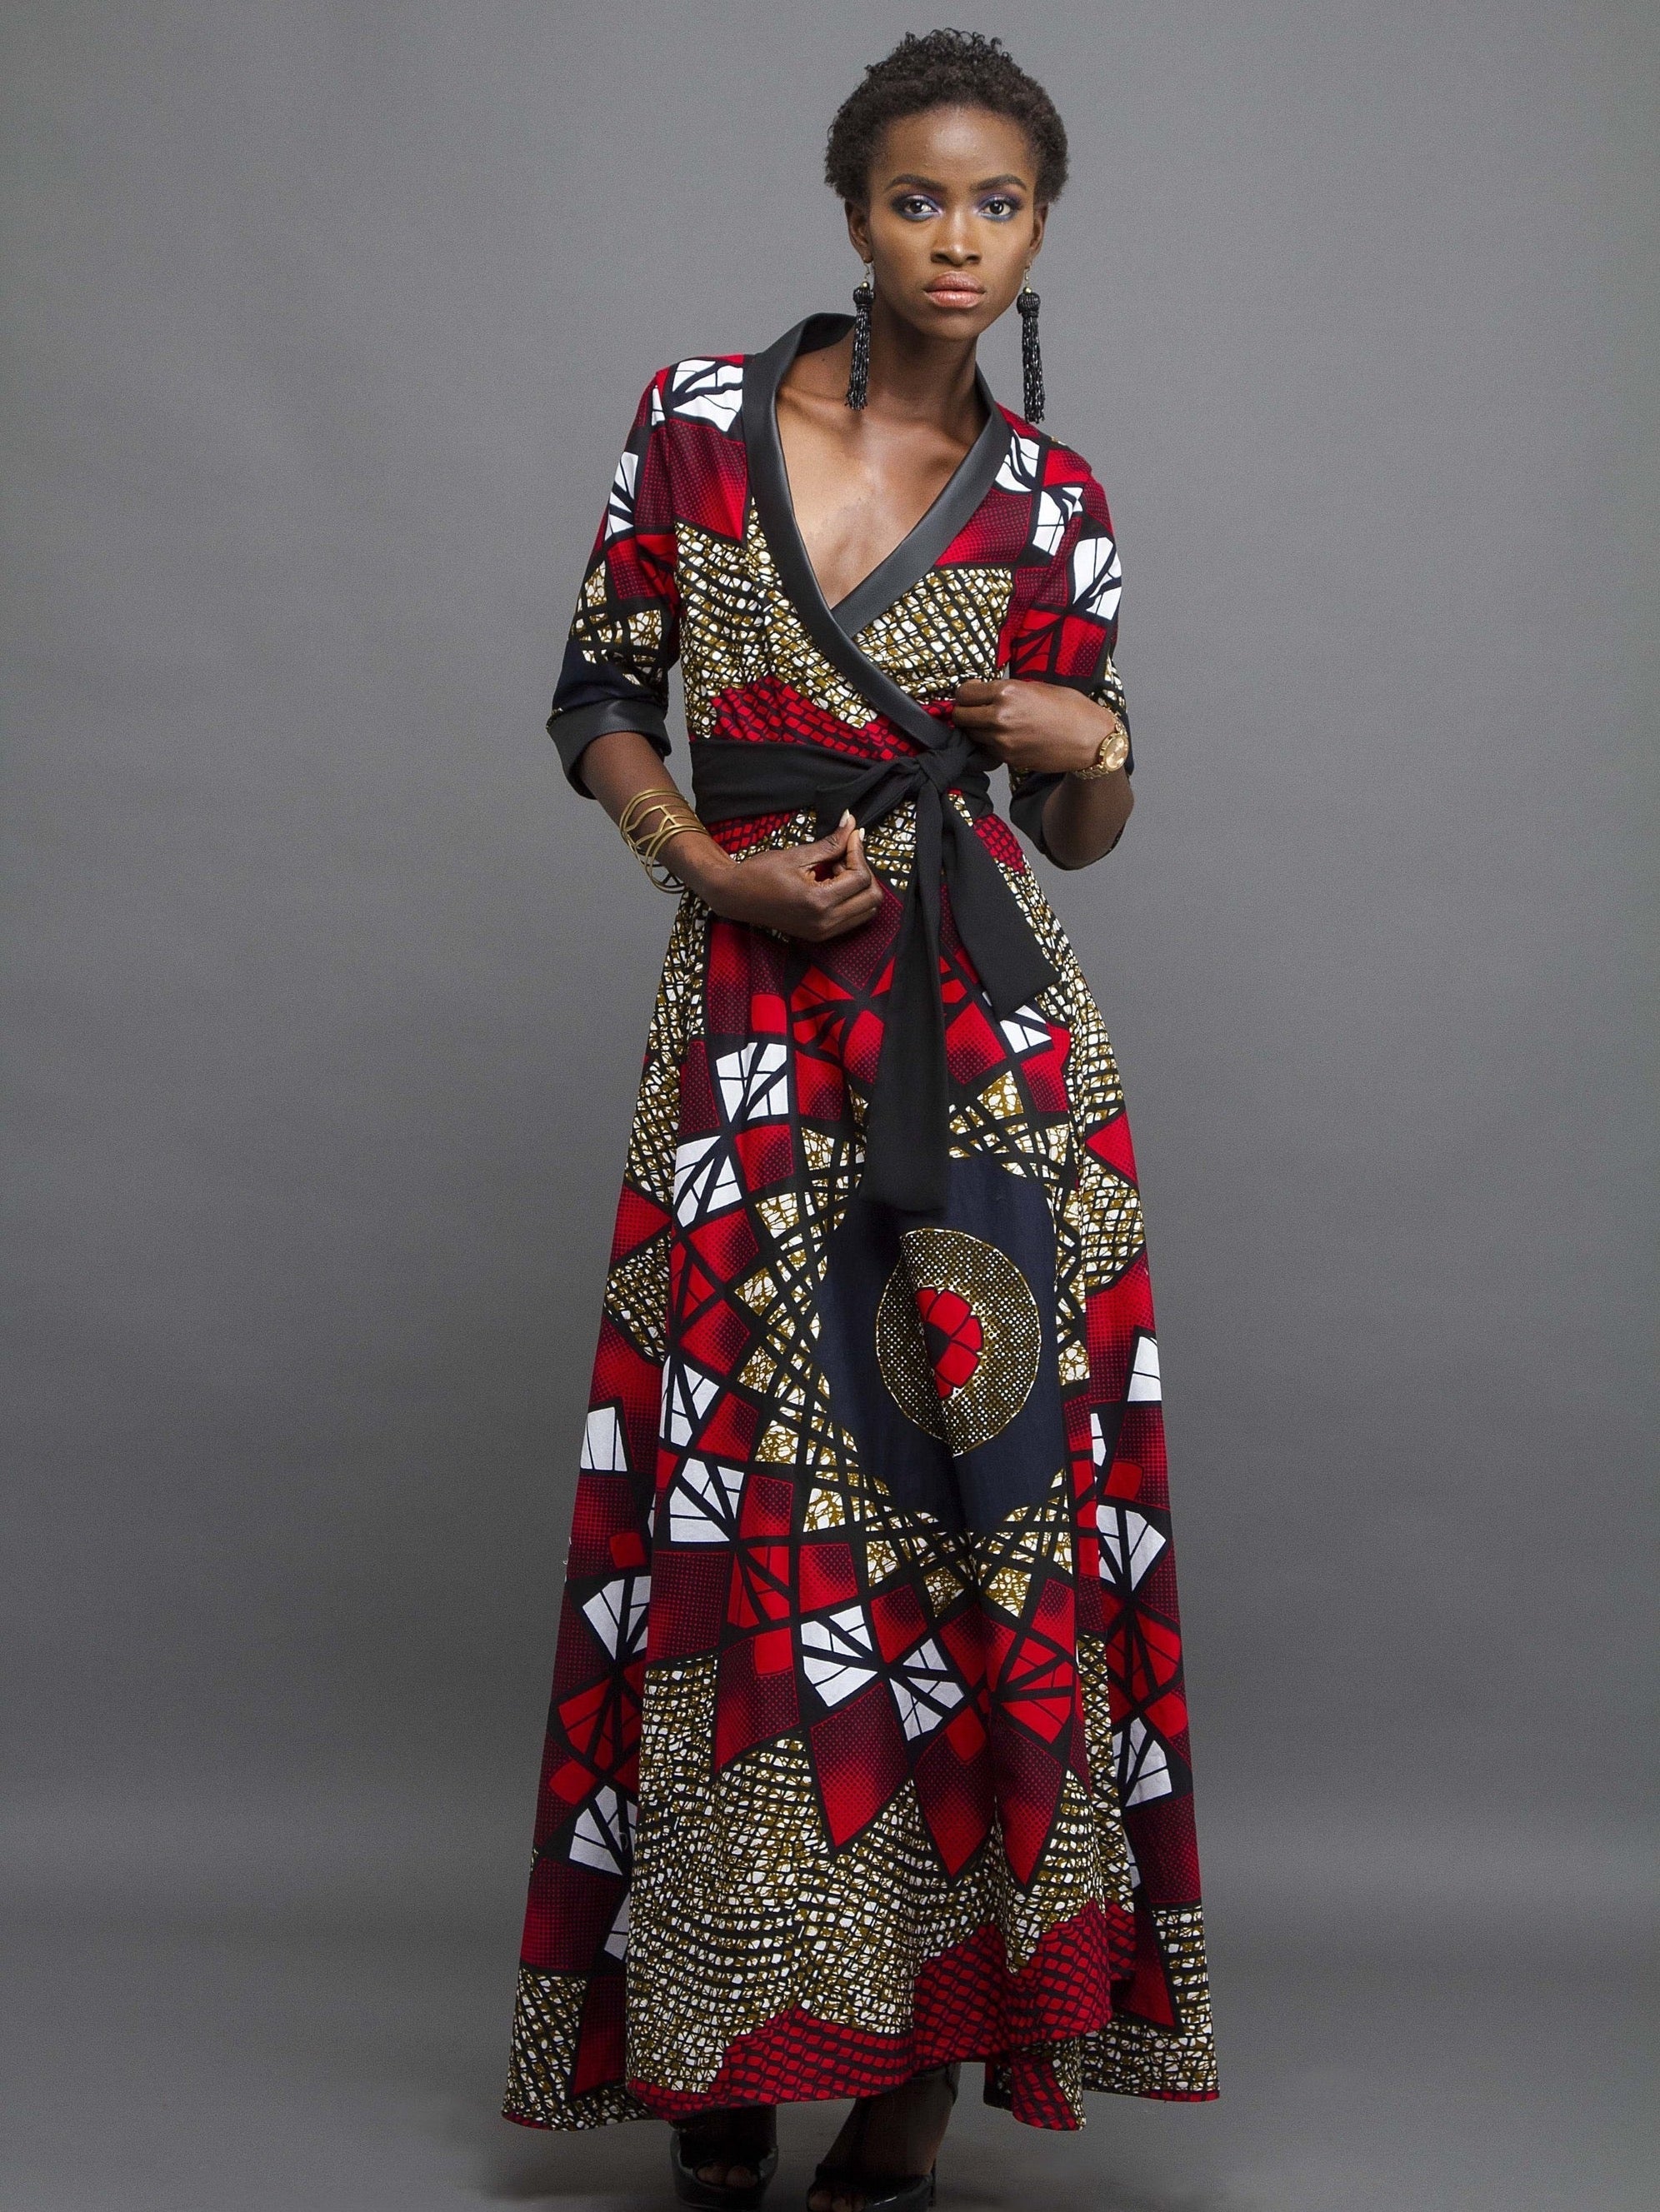 A  staple in every woman's wardrobe, the wrap dress never goes out of style. The African print keeps it fresh and modern for a flattering look is effortlessly chic.